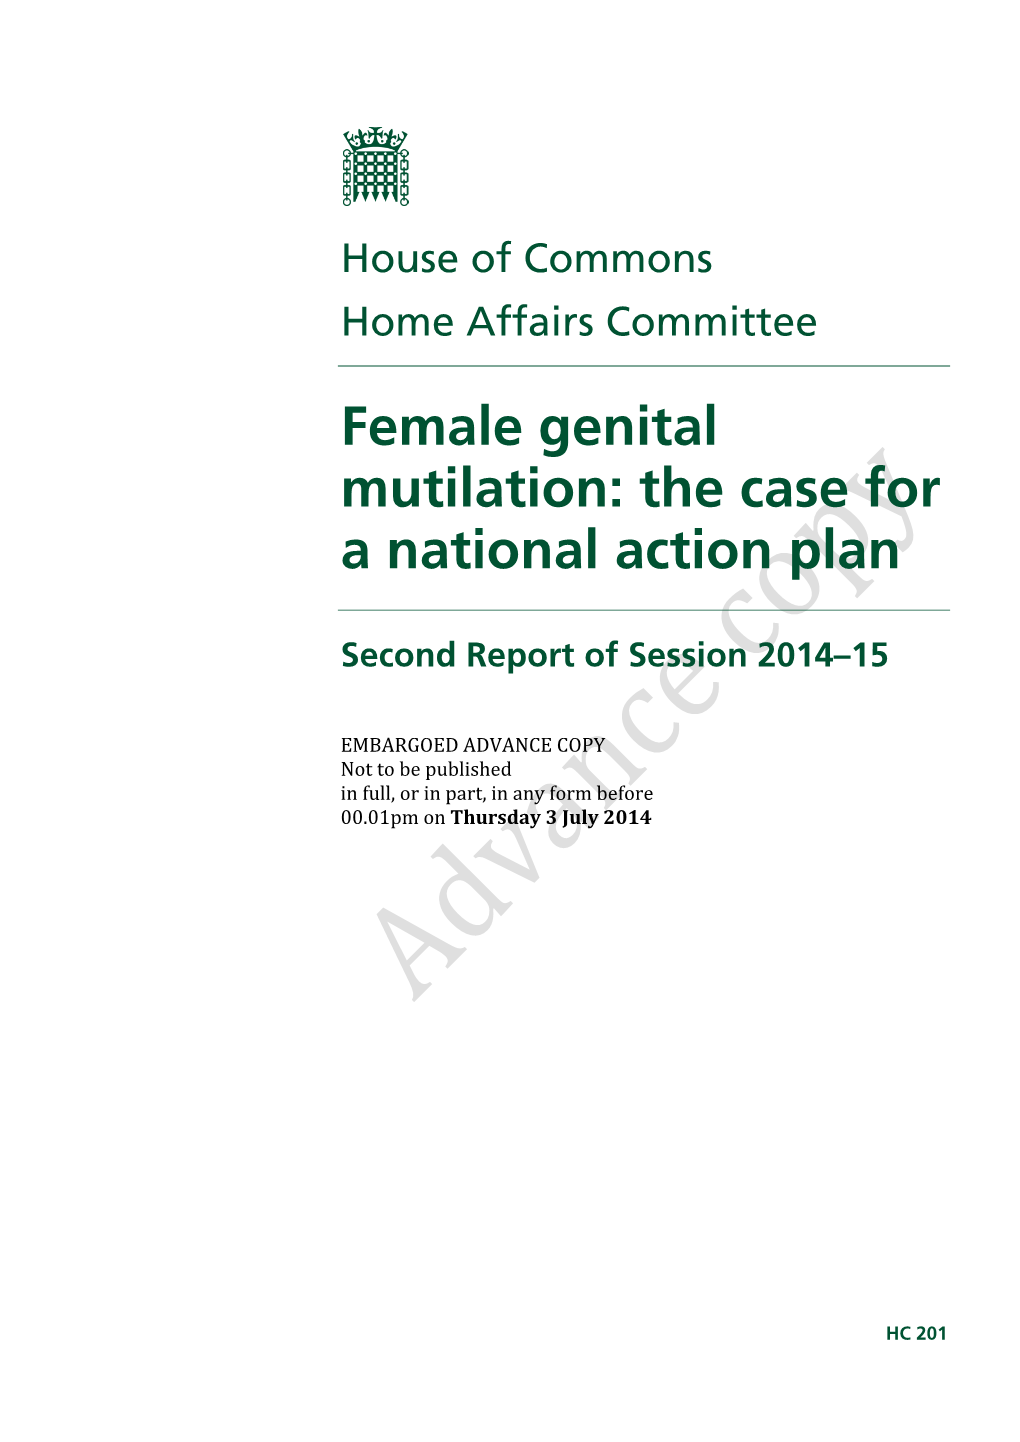 Female Genital Mutilation: the Case for a National Action Plan